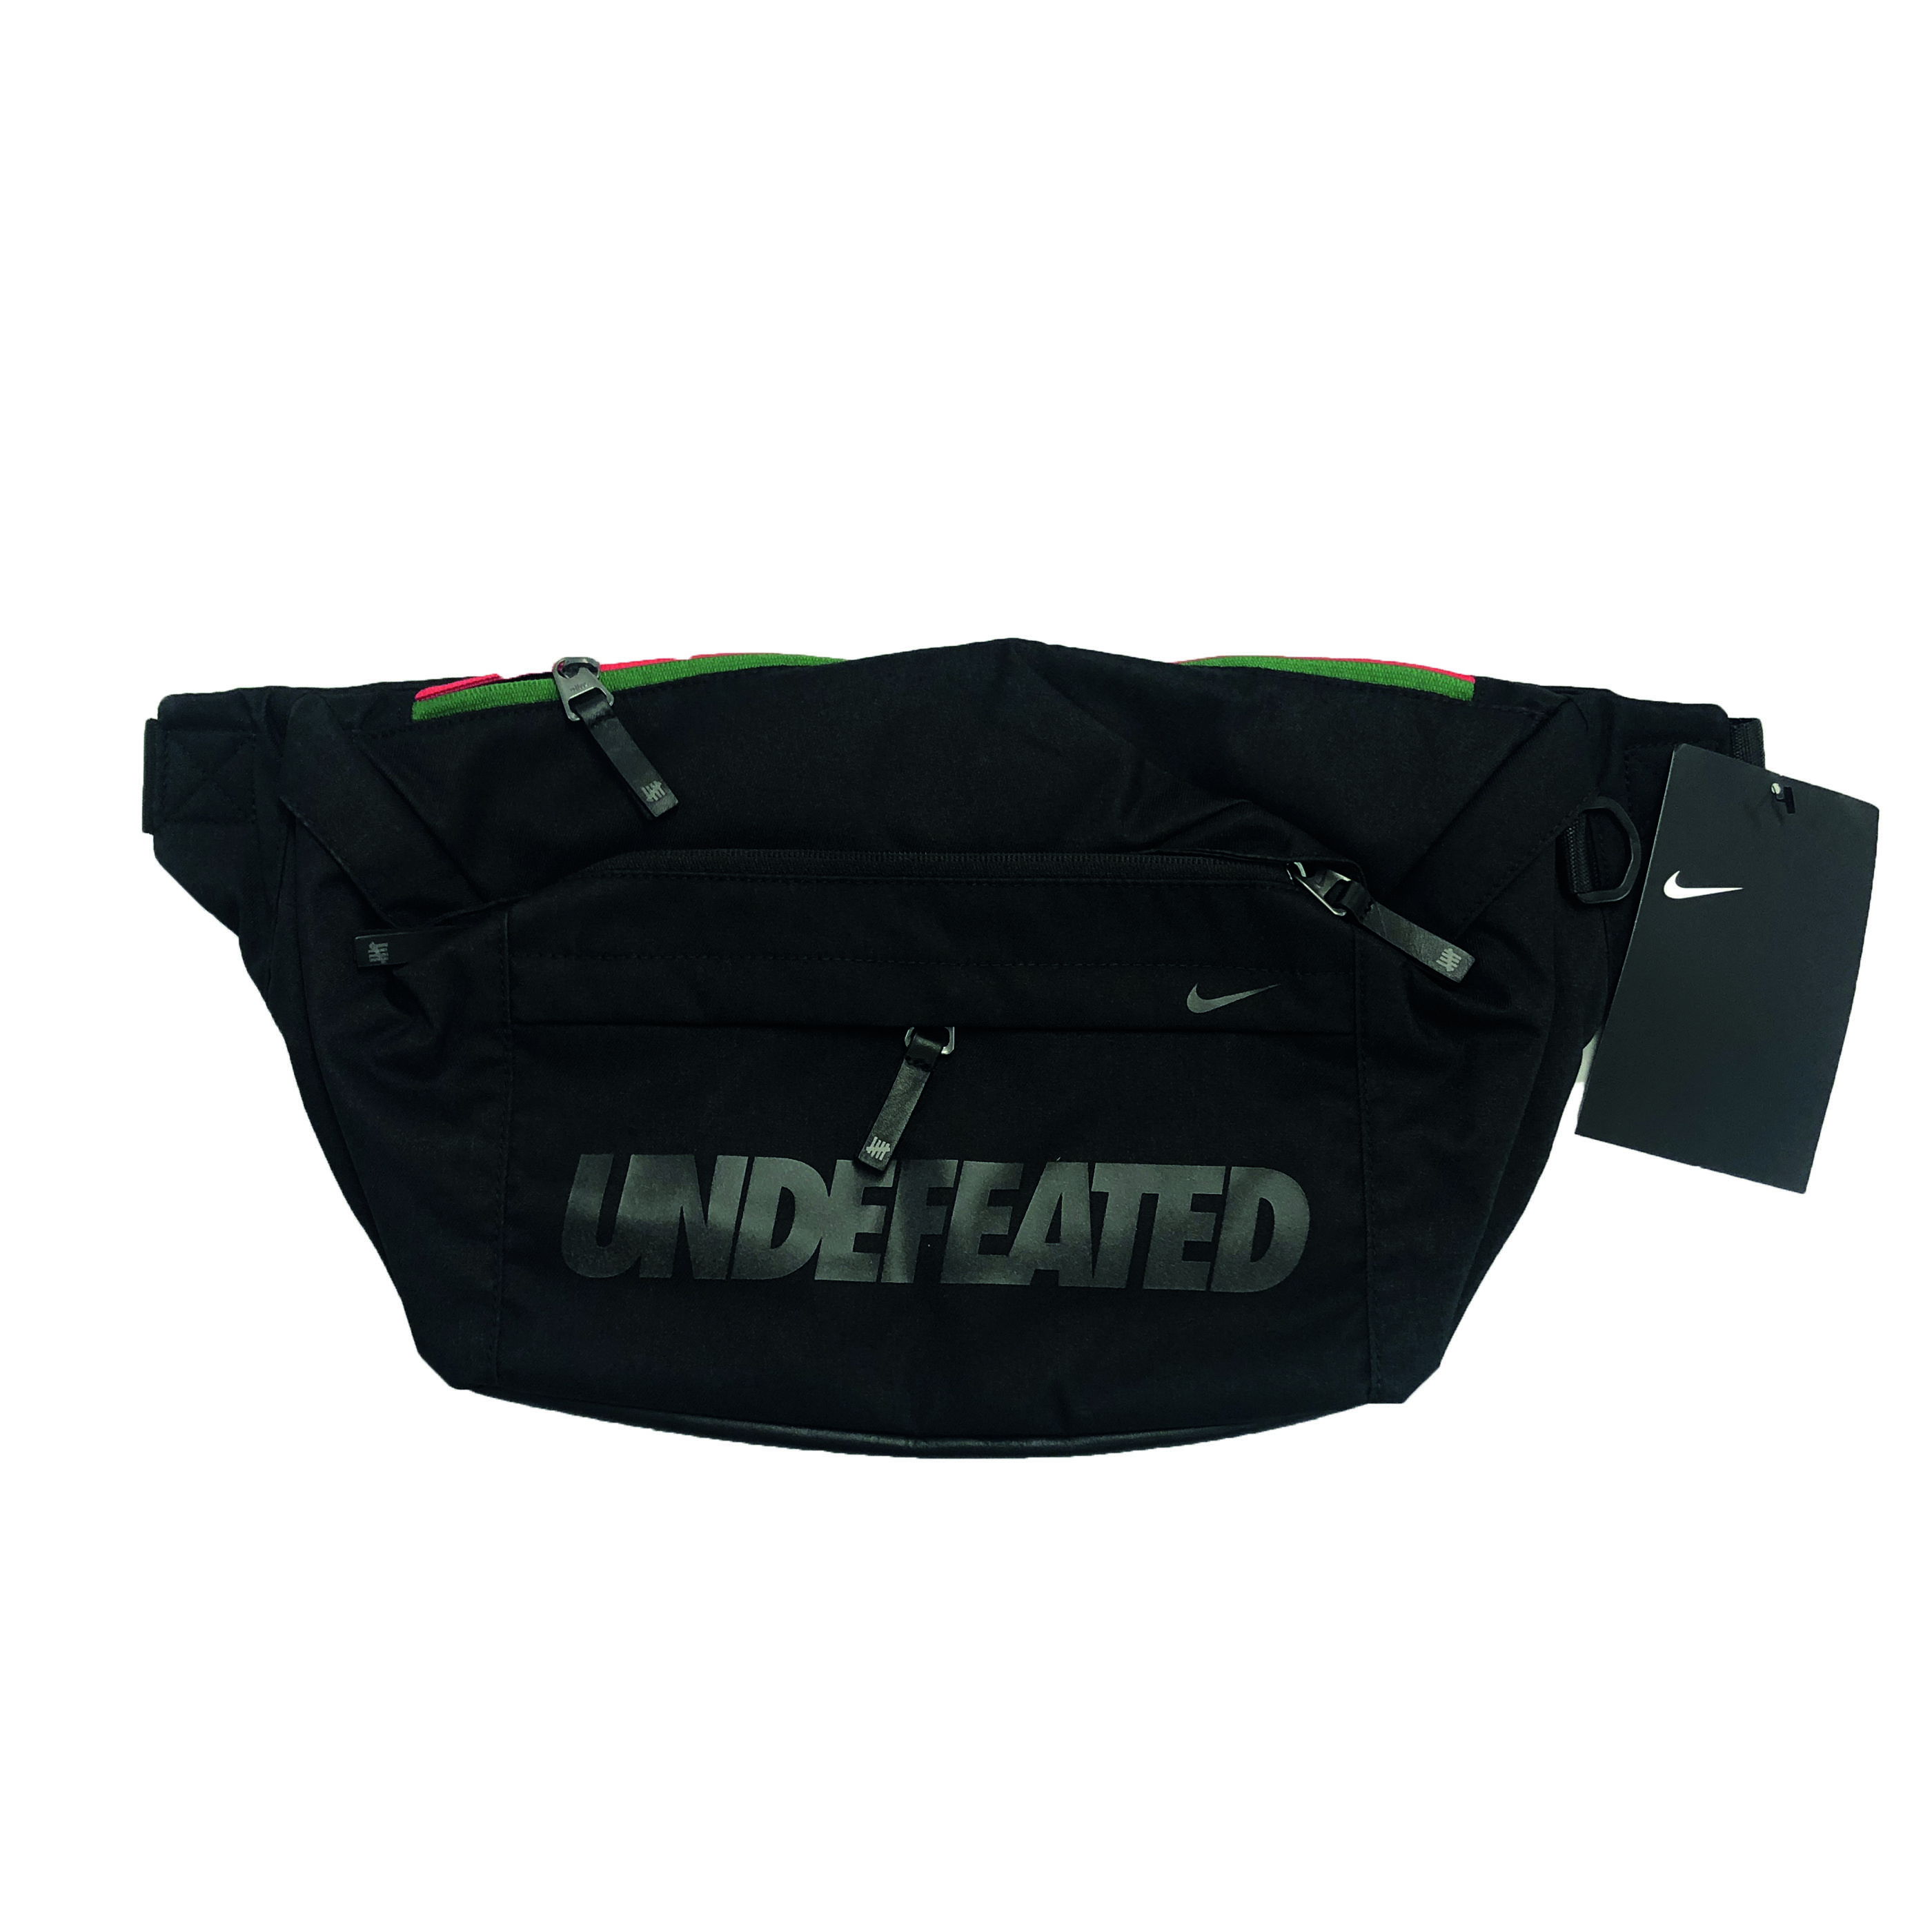 [Nike x Undefeated] Tech Bag Black